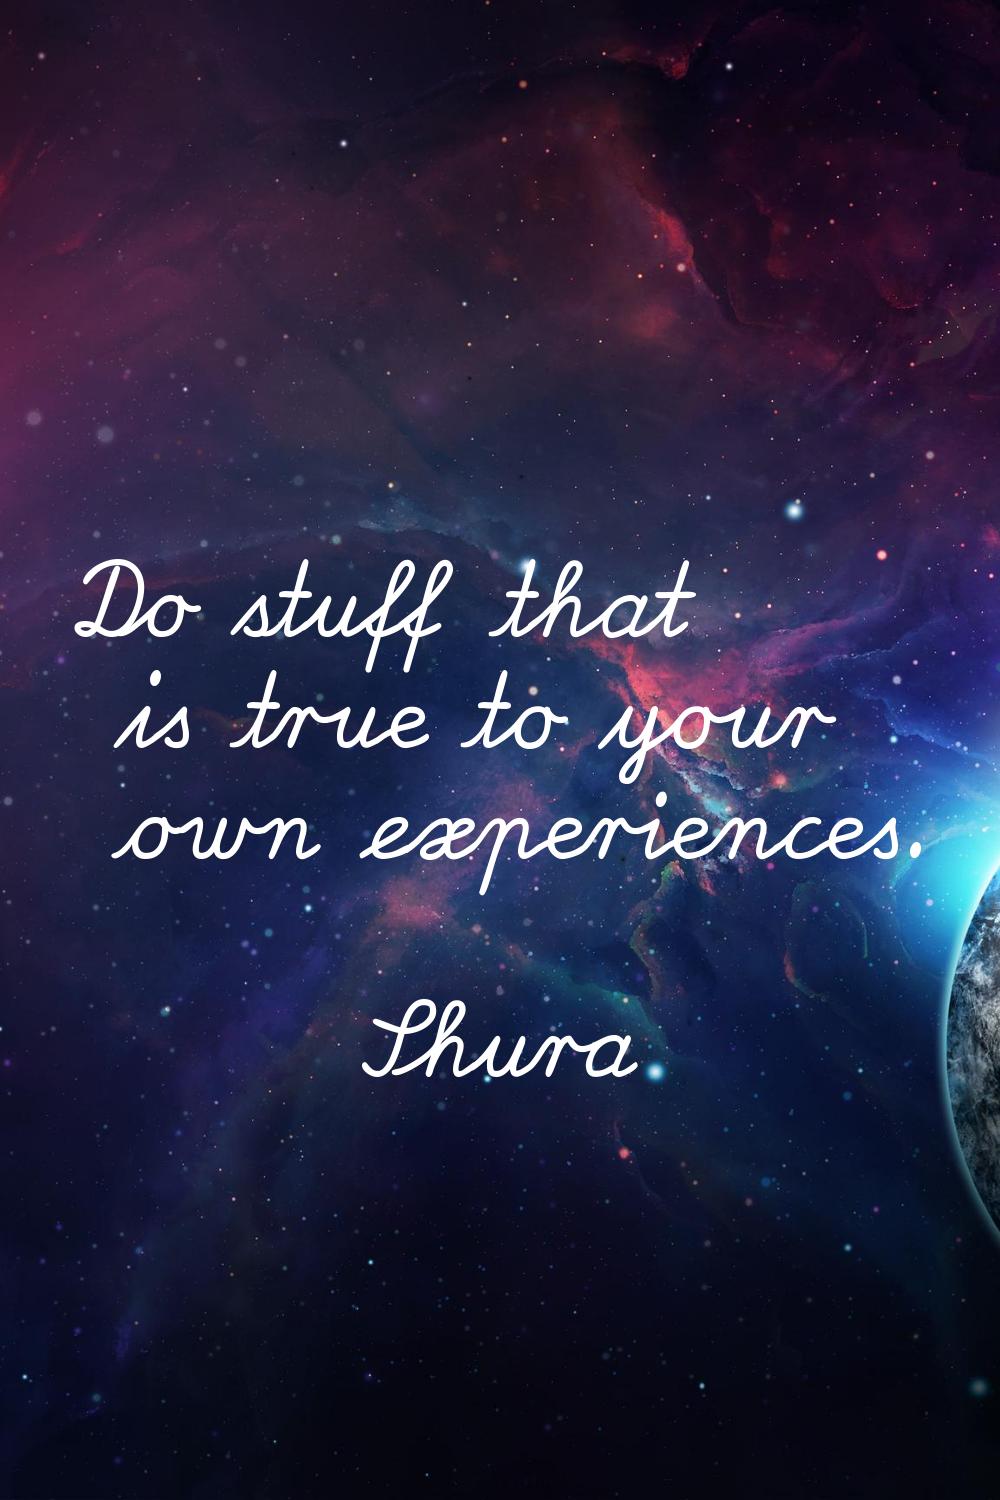 Do stuff that is true to your own experiences.